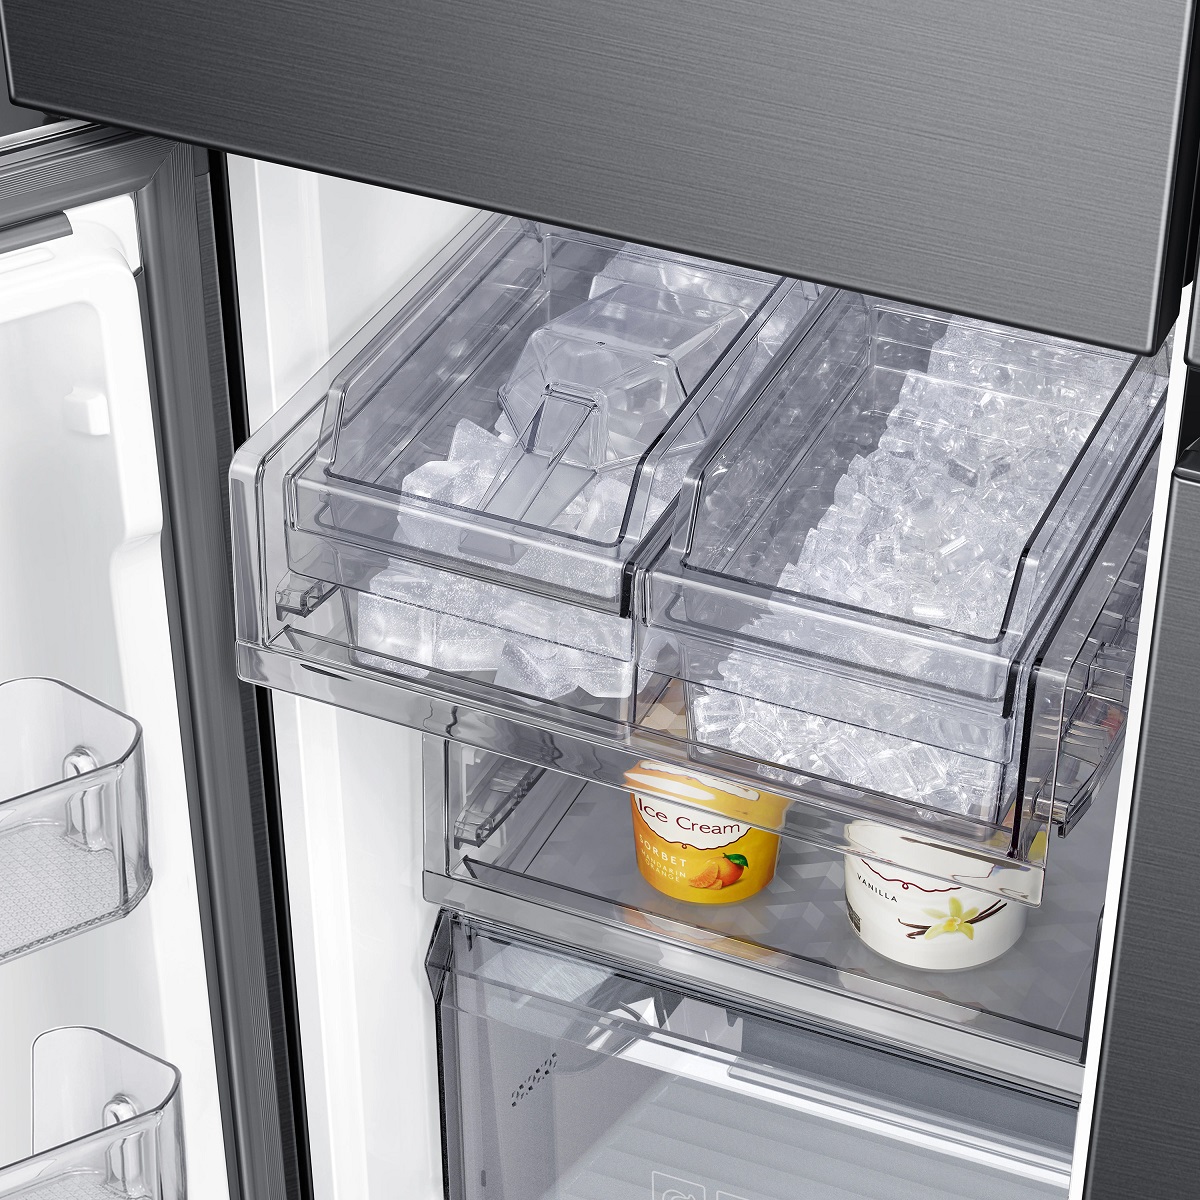 How To Turn Ice Maker On Samsung Refrigerator